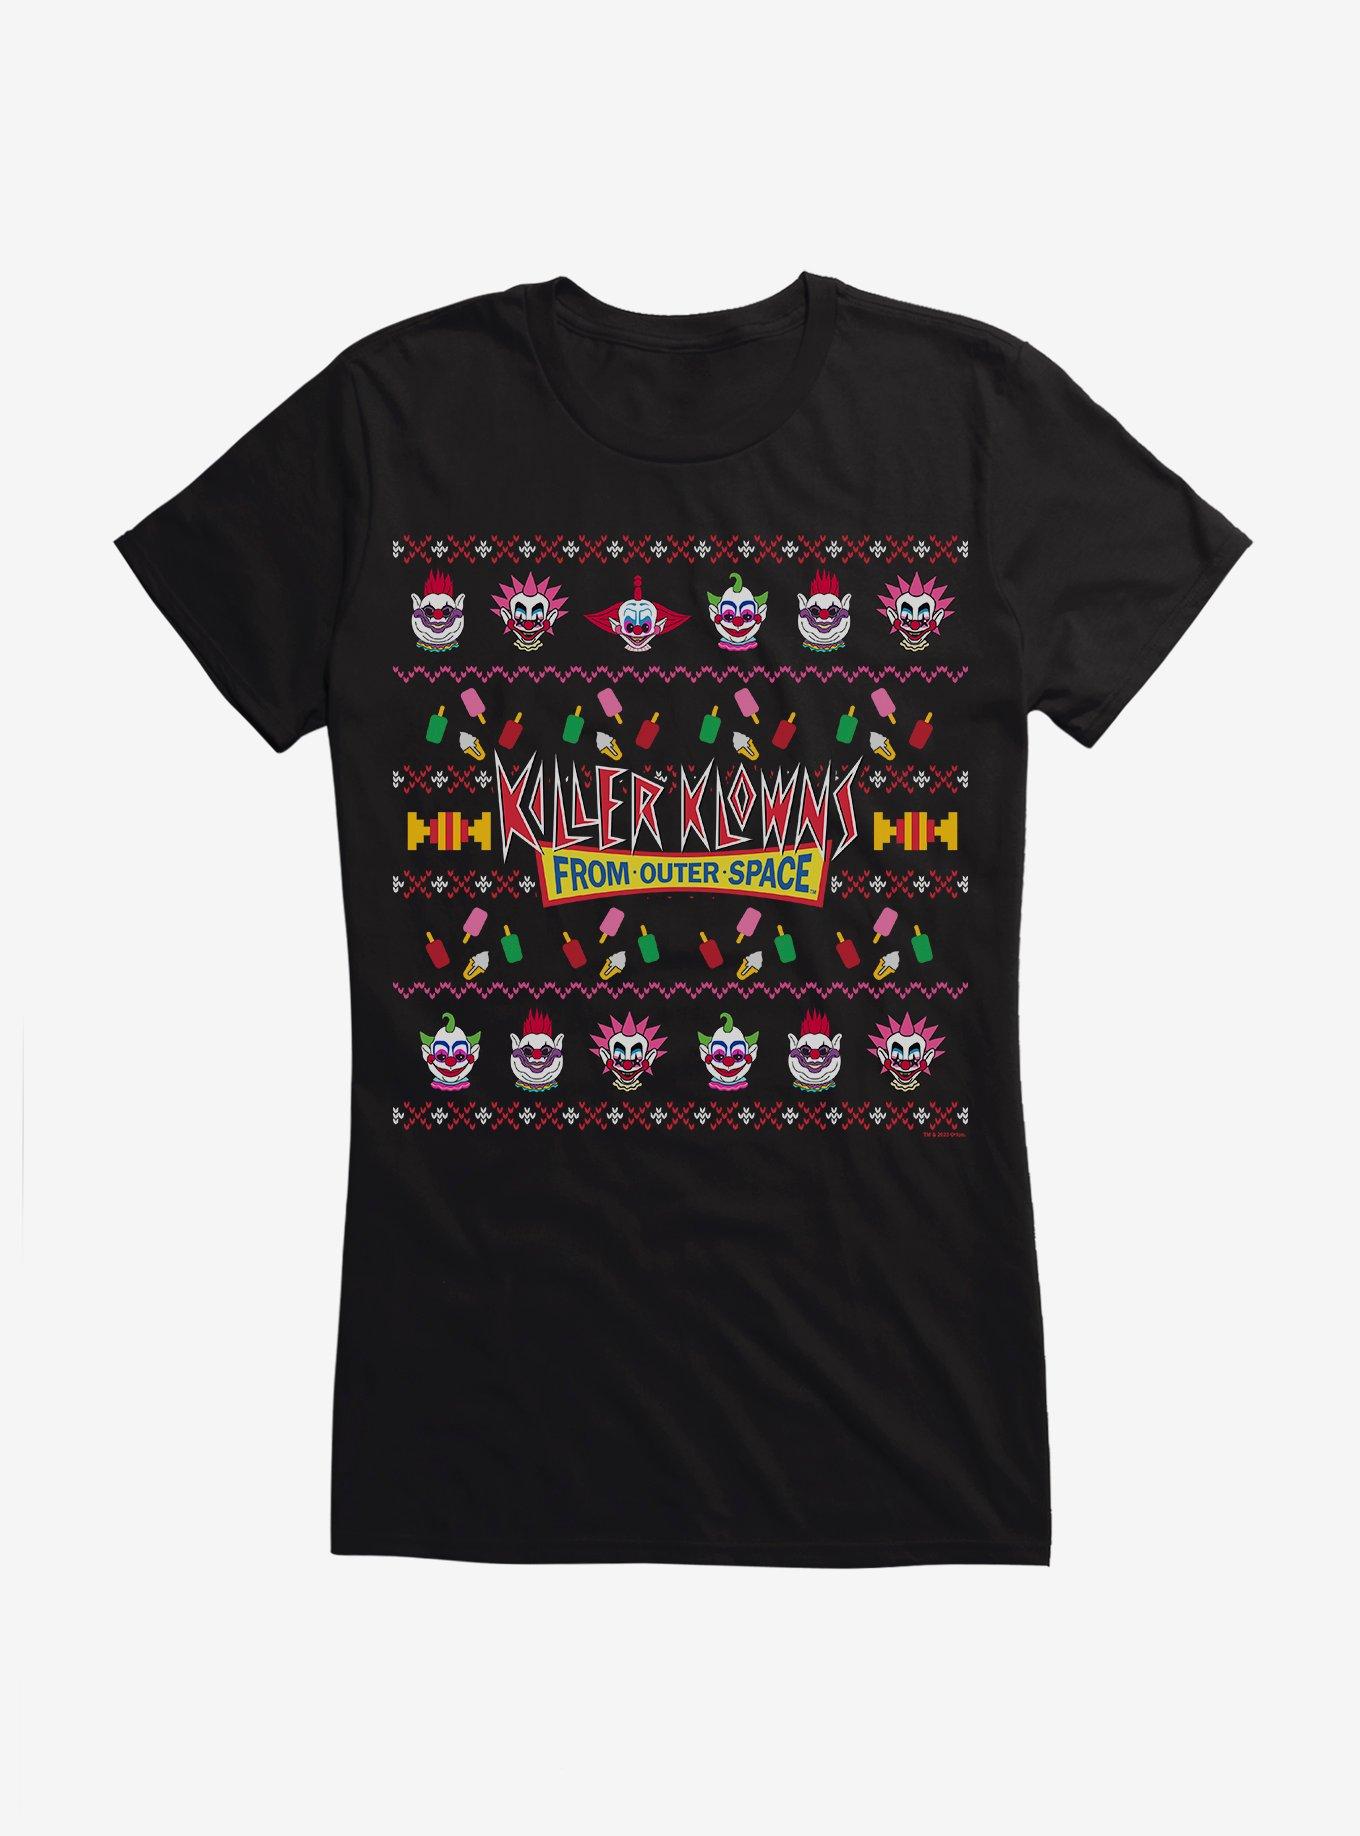 Killer Klowns From Outer Space Ugly Christmas Sweater Pattern Girls T-Shirt, BLACK, hi-res